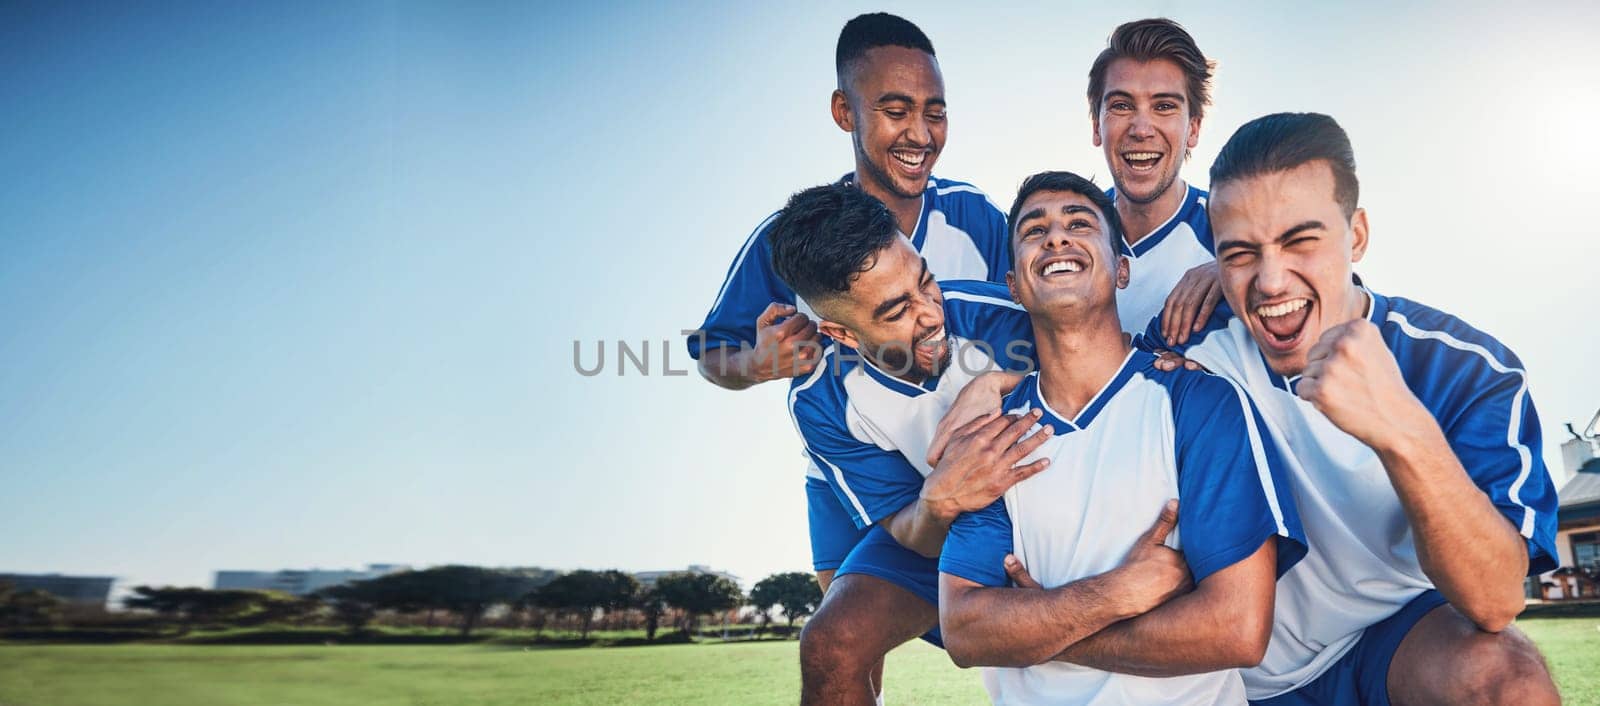 Sports, mockup and a team of soccer players in celebration on a field for success in a game. Football, fitness and motivation with man friends cheering as winners of a competition on a pitch together.